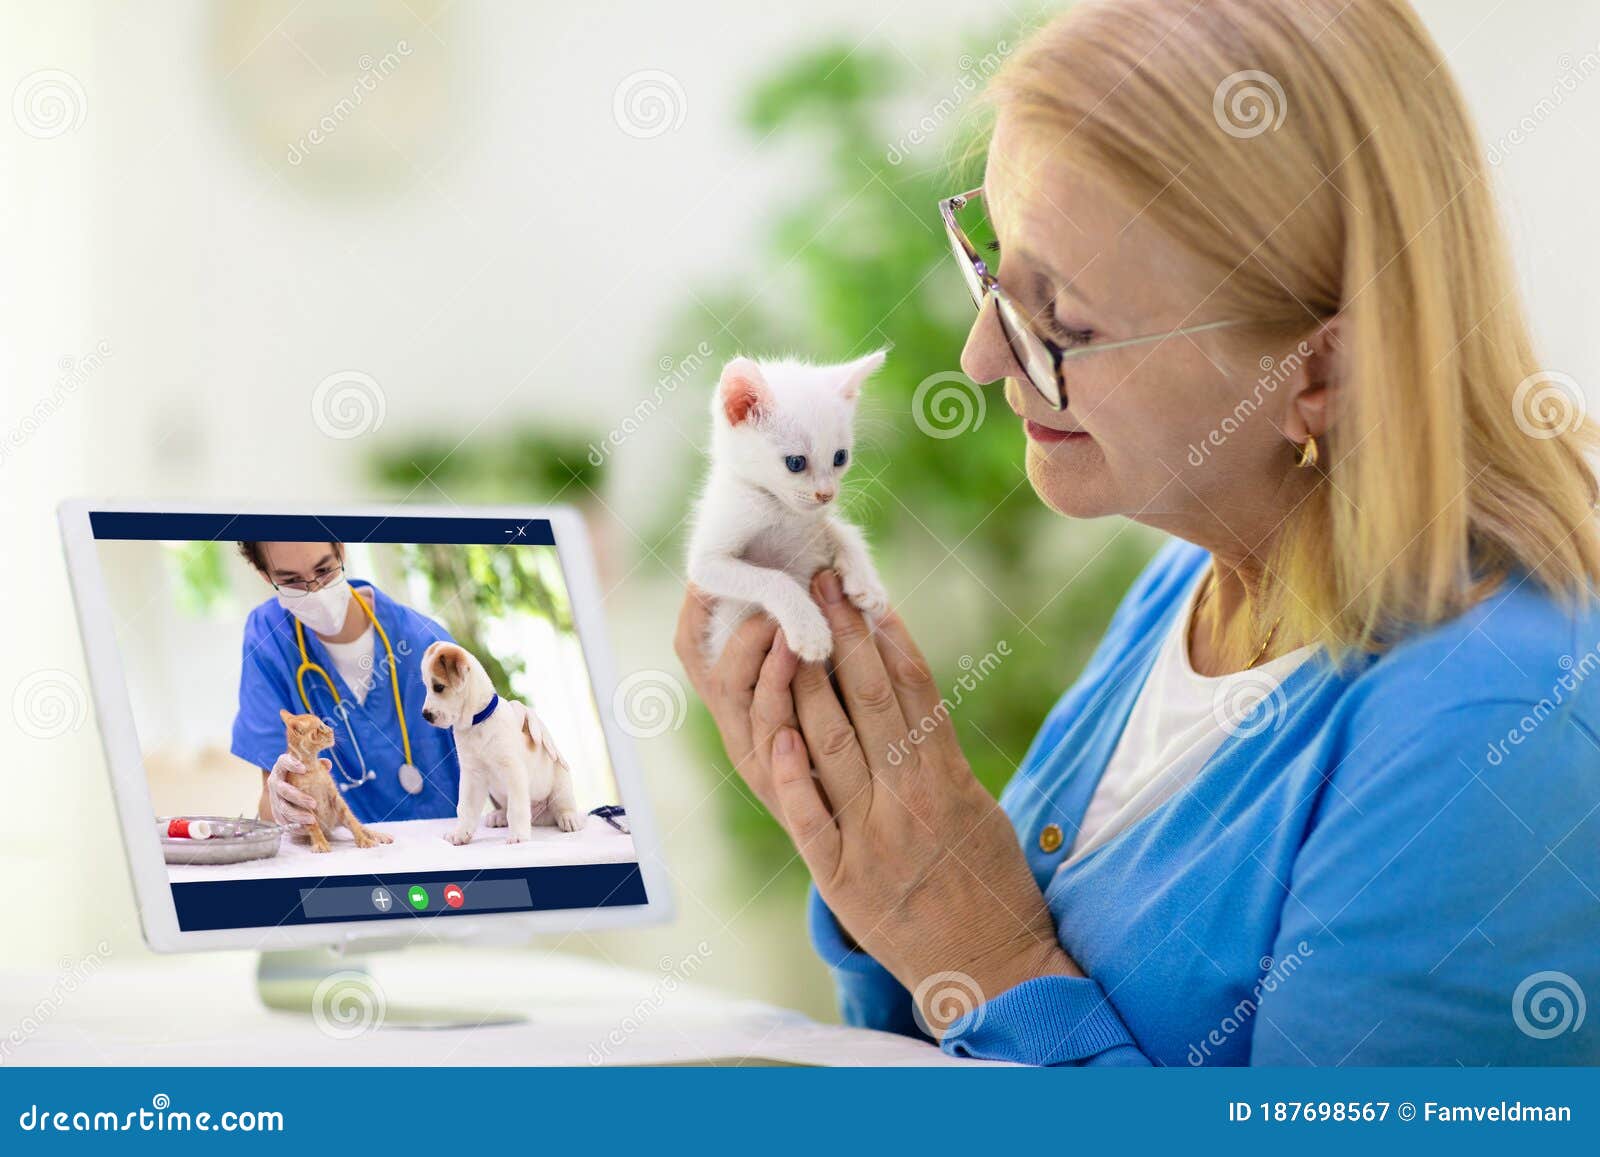 Online Consultation with Veterinarian Doctor Stock Image - Image of  internet, examination: 187698567